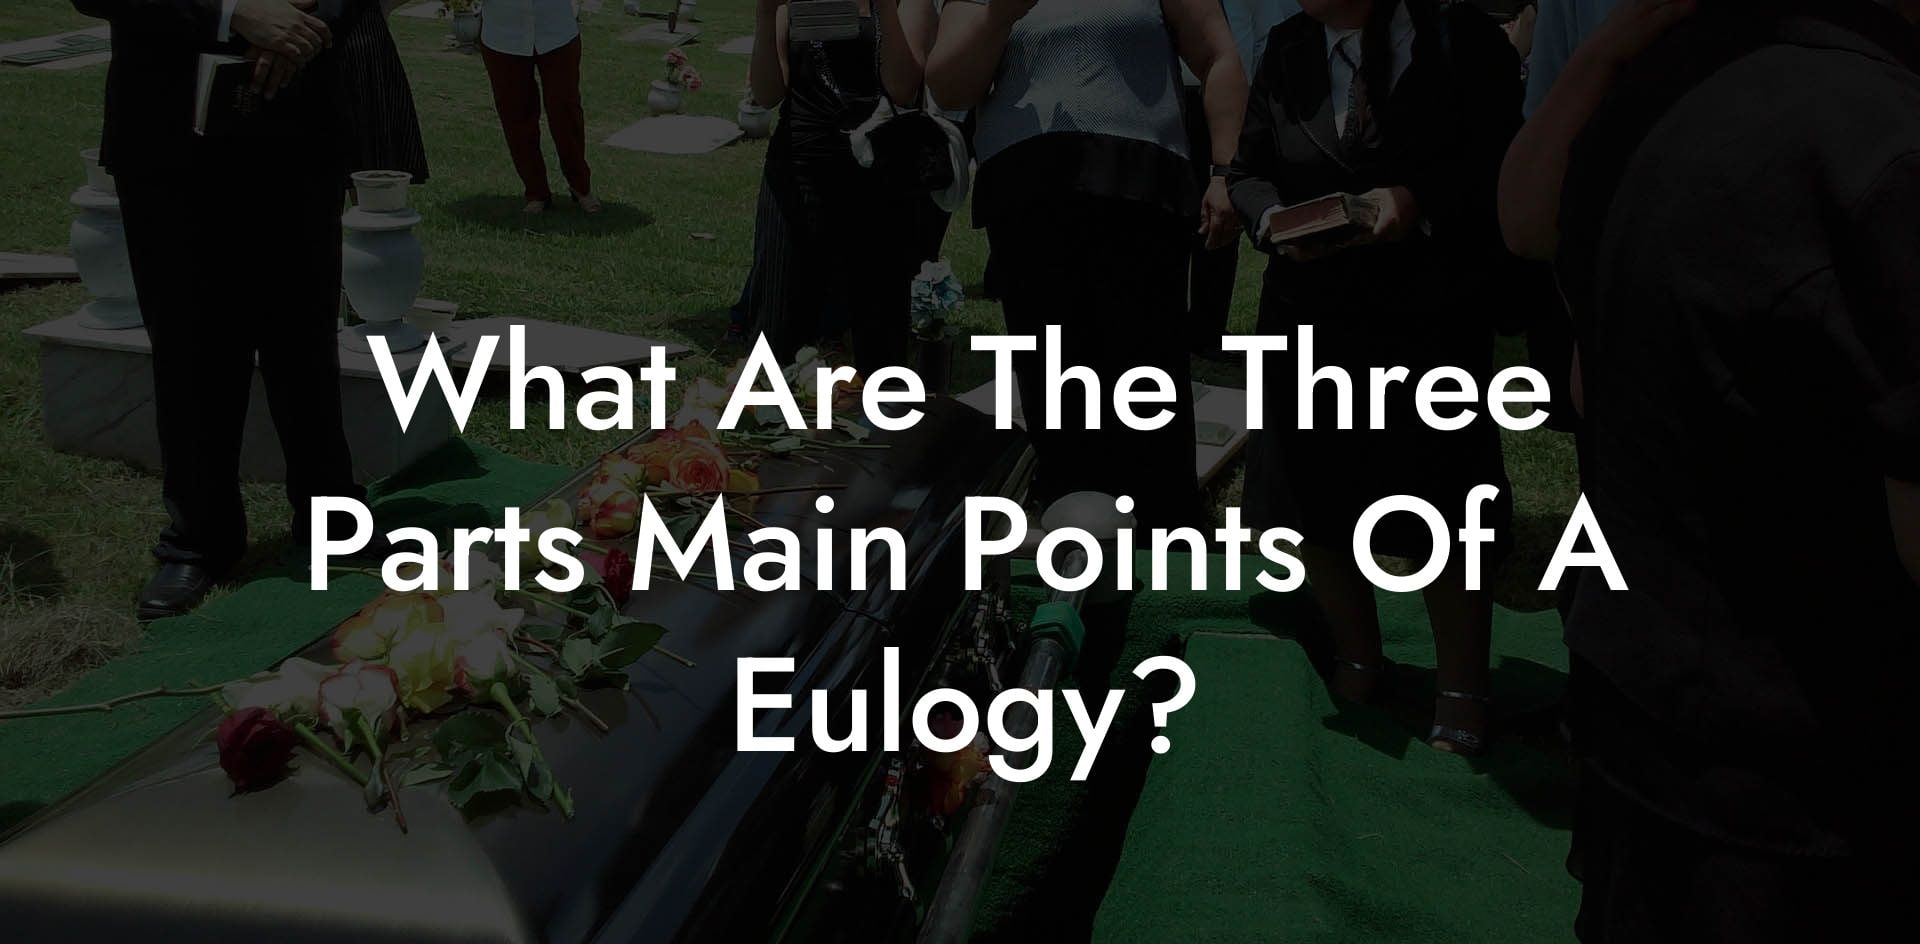 What Are The Three Parts Main Points Of A Eulogy?